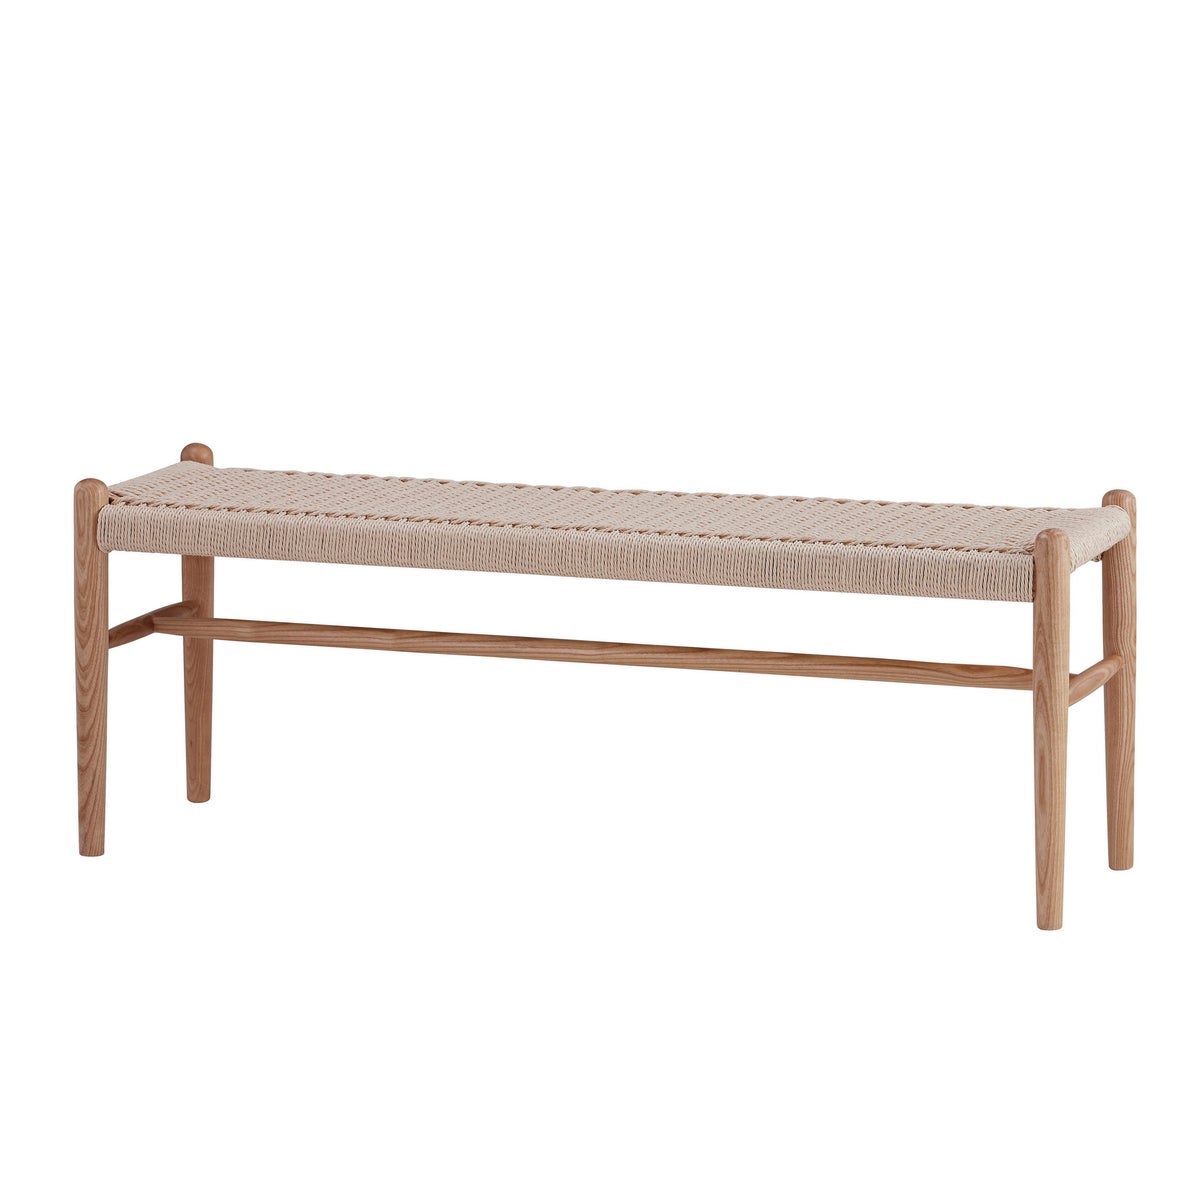 -WAGNER BENCH